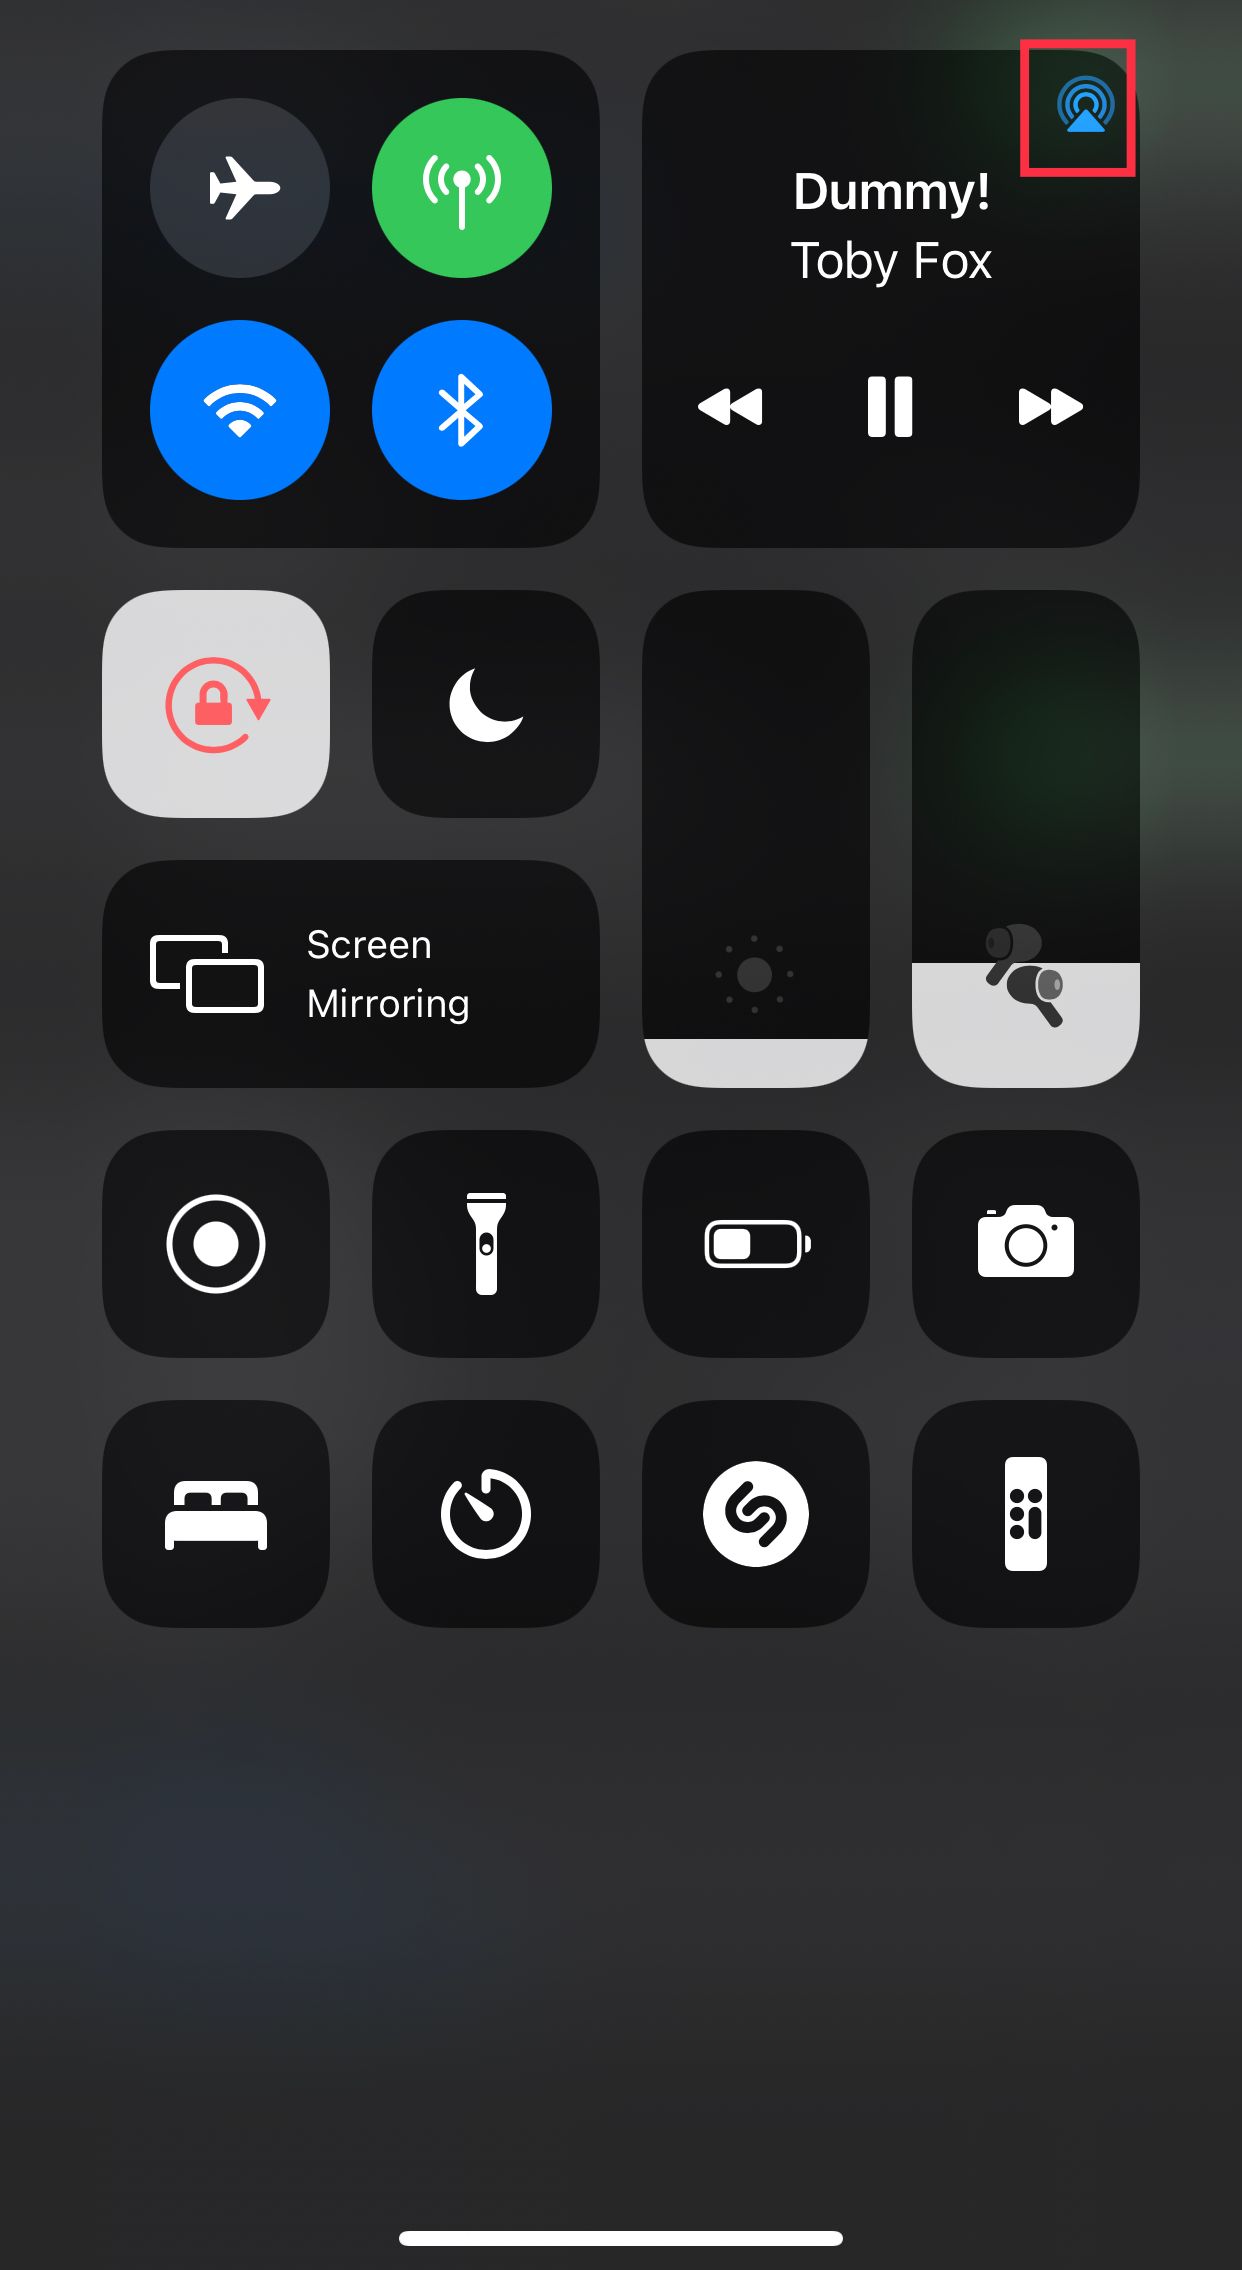 Tap the blue icon to share AirPods audio